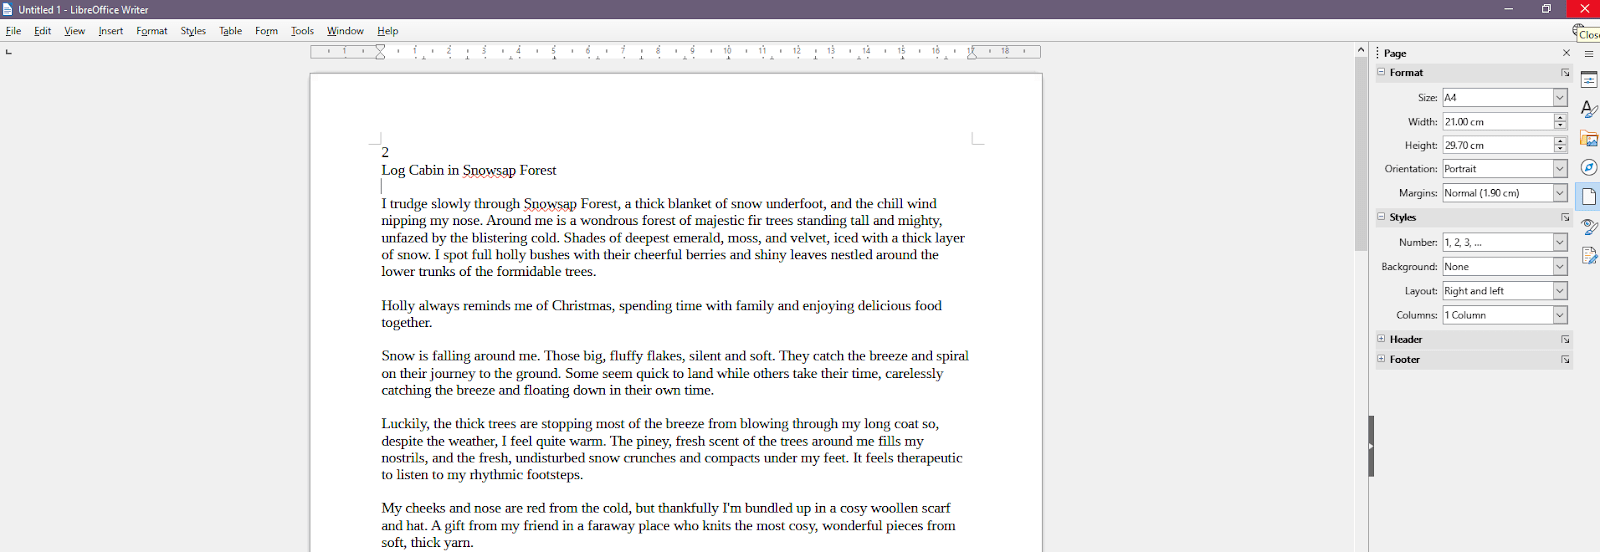 An open-source word processing tool similar to Microsoft Word